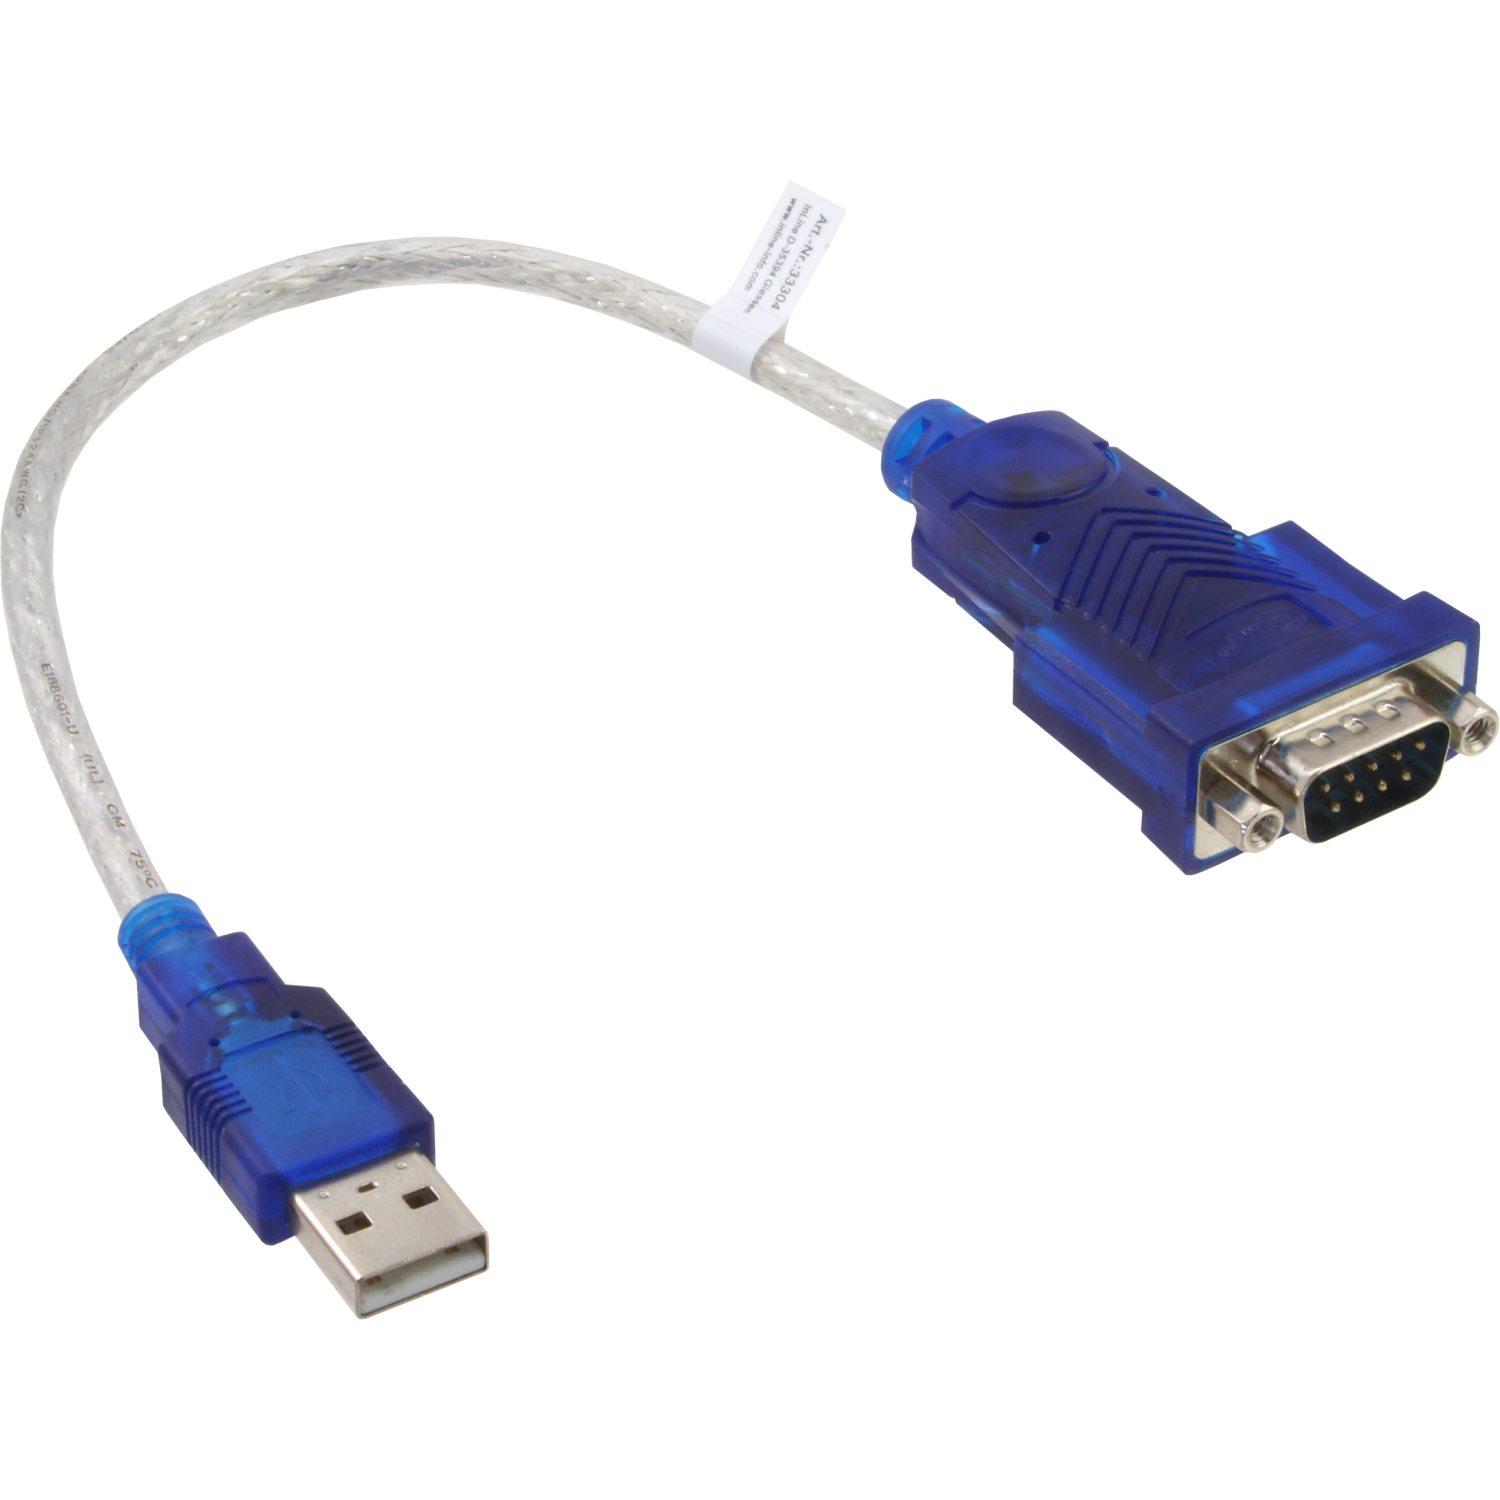 USB to serial adapter, length: 20 cm